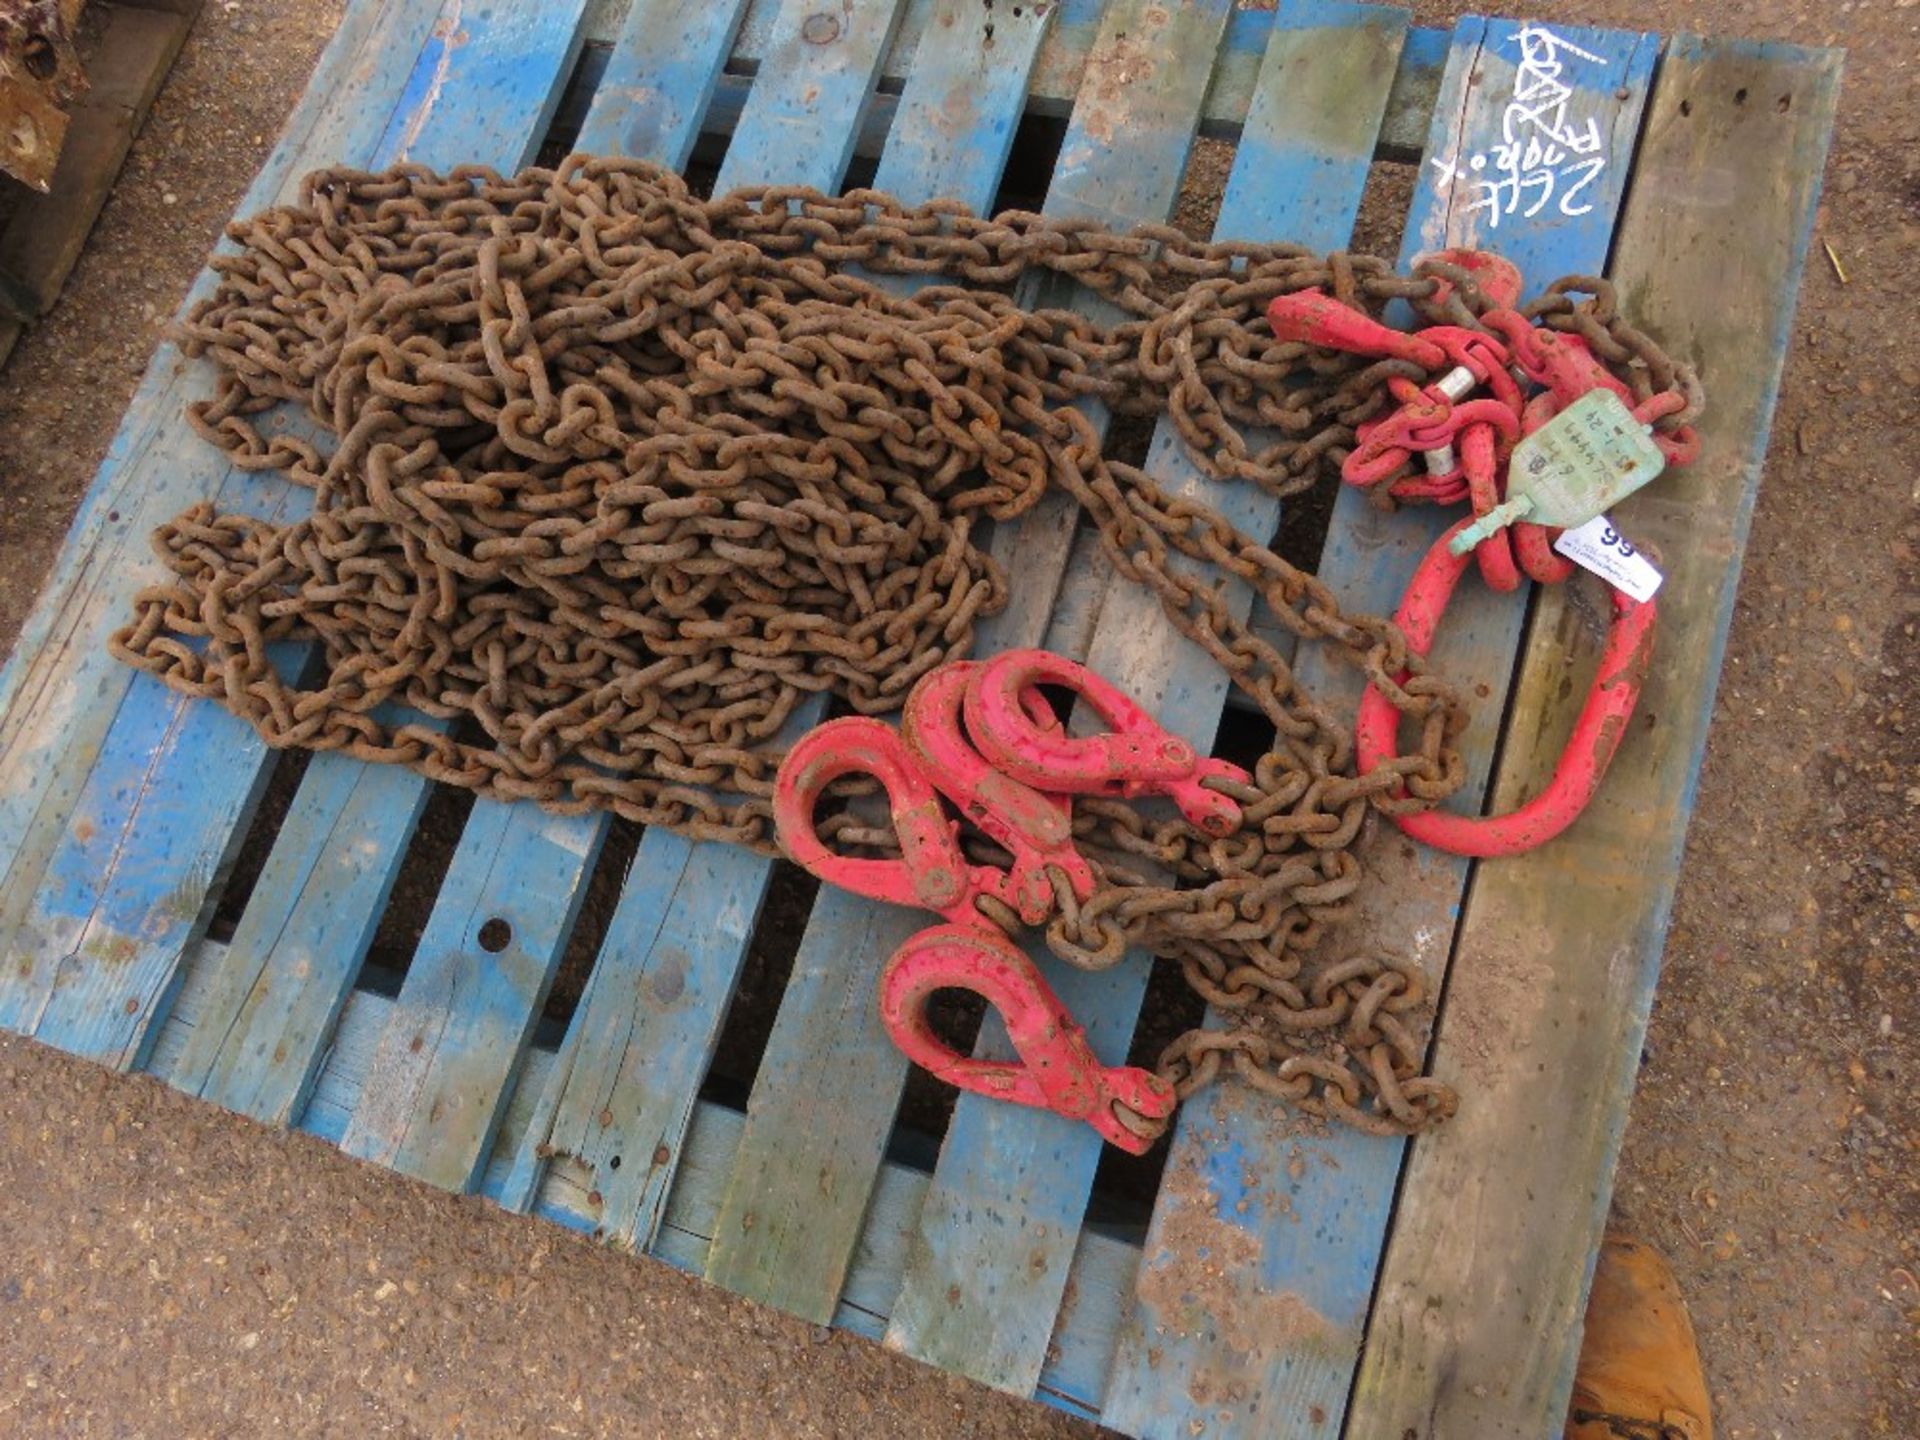 HEAVY DUTY EXTRA LONG SET OF 4 LEGGED LIFTING CHAINS WITH SHORTENERS. 6.7TONNE RATED, 25FT LENGTH AP